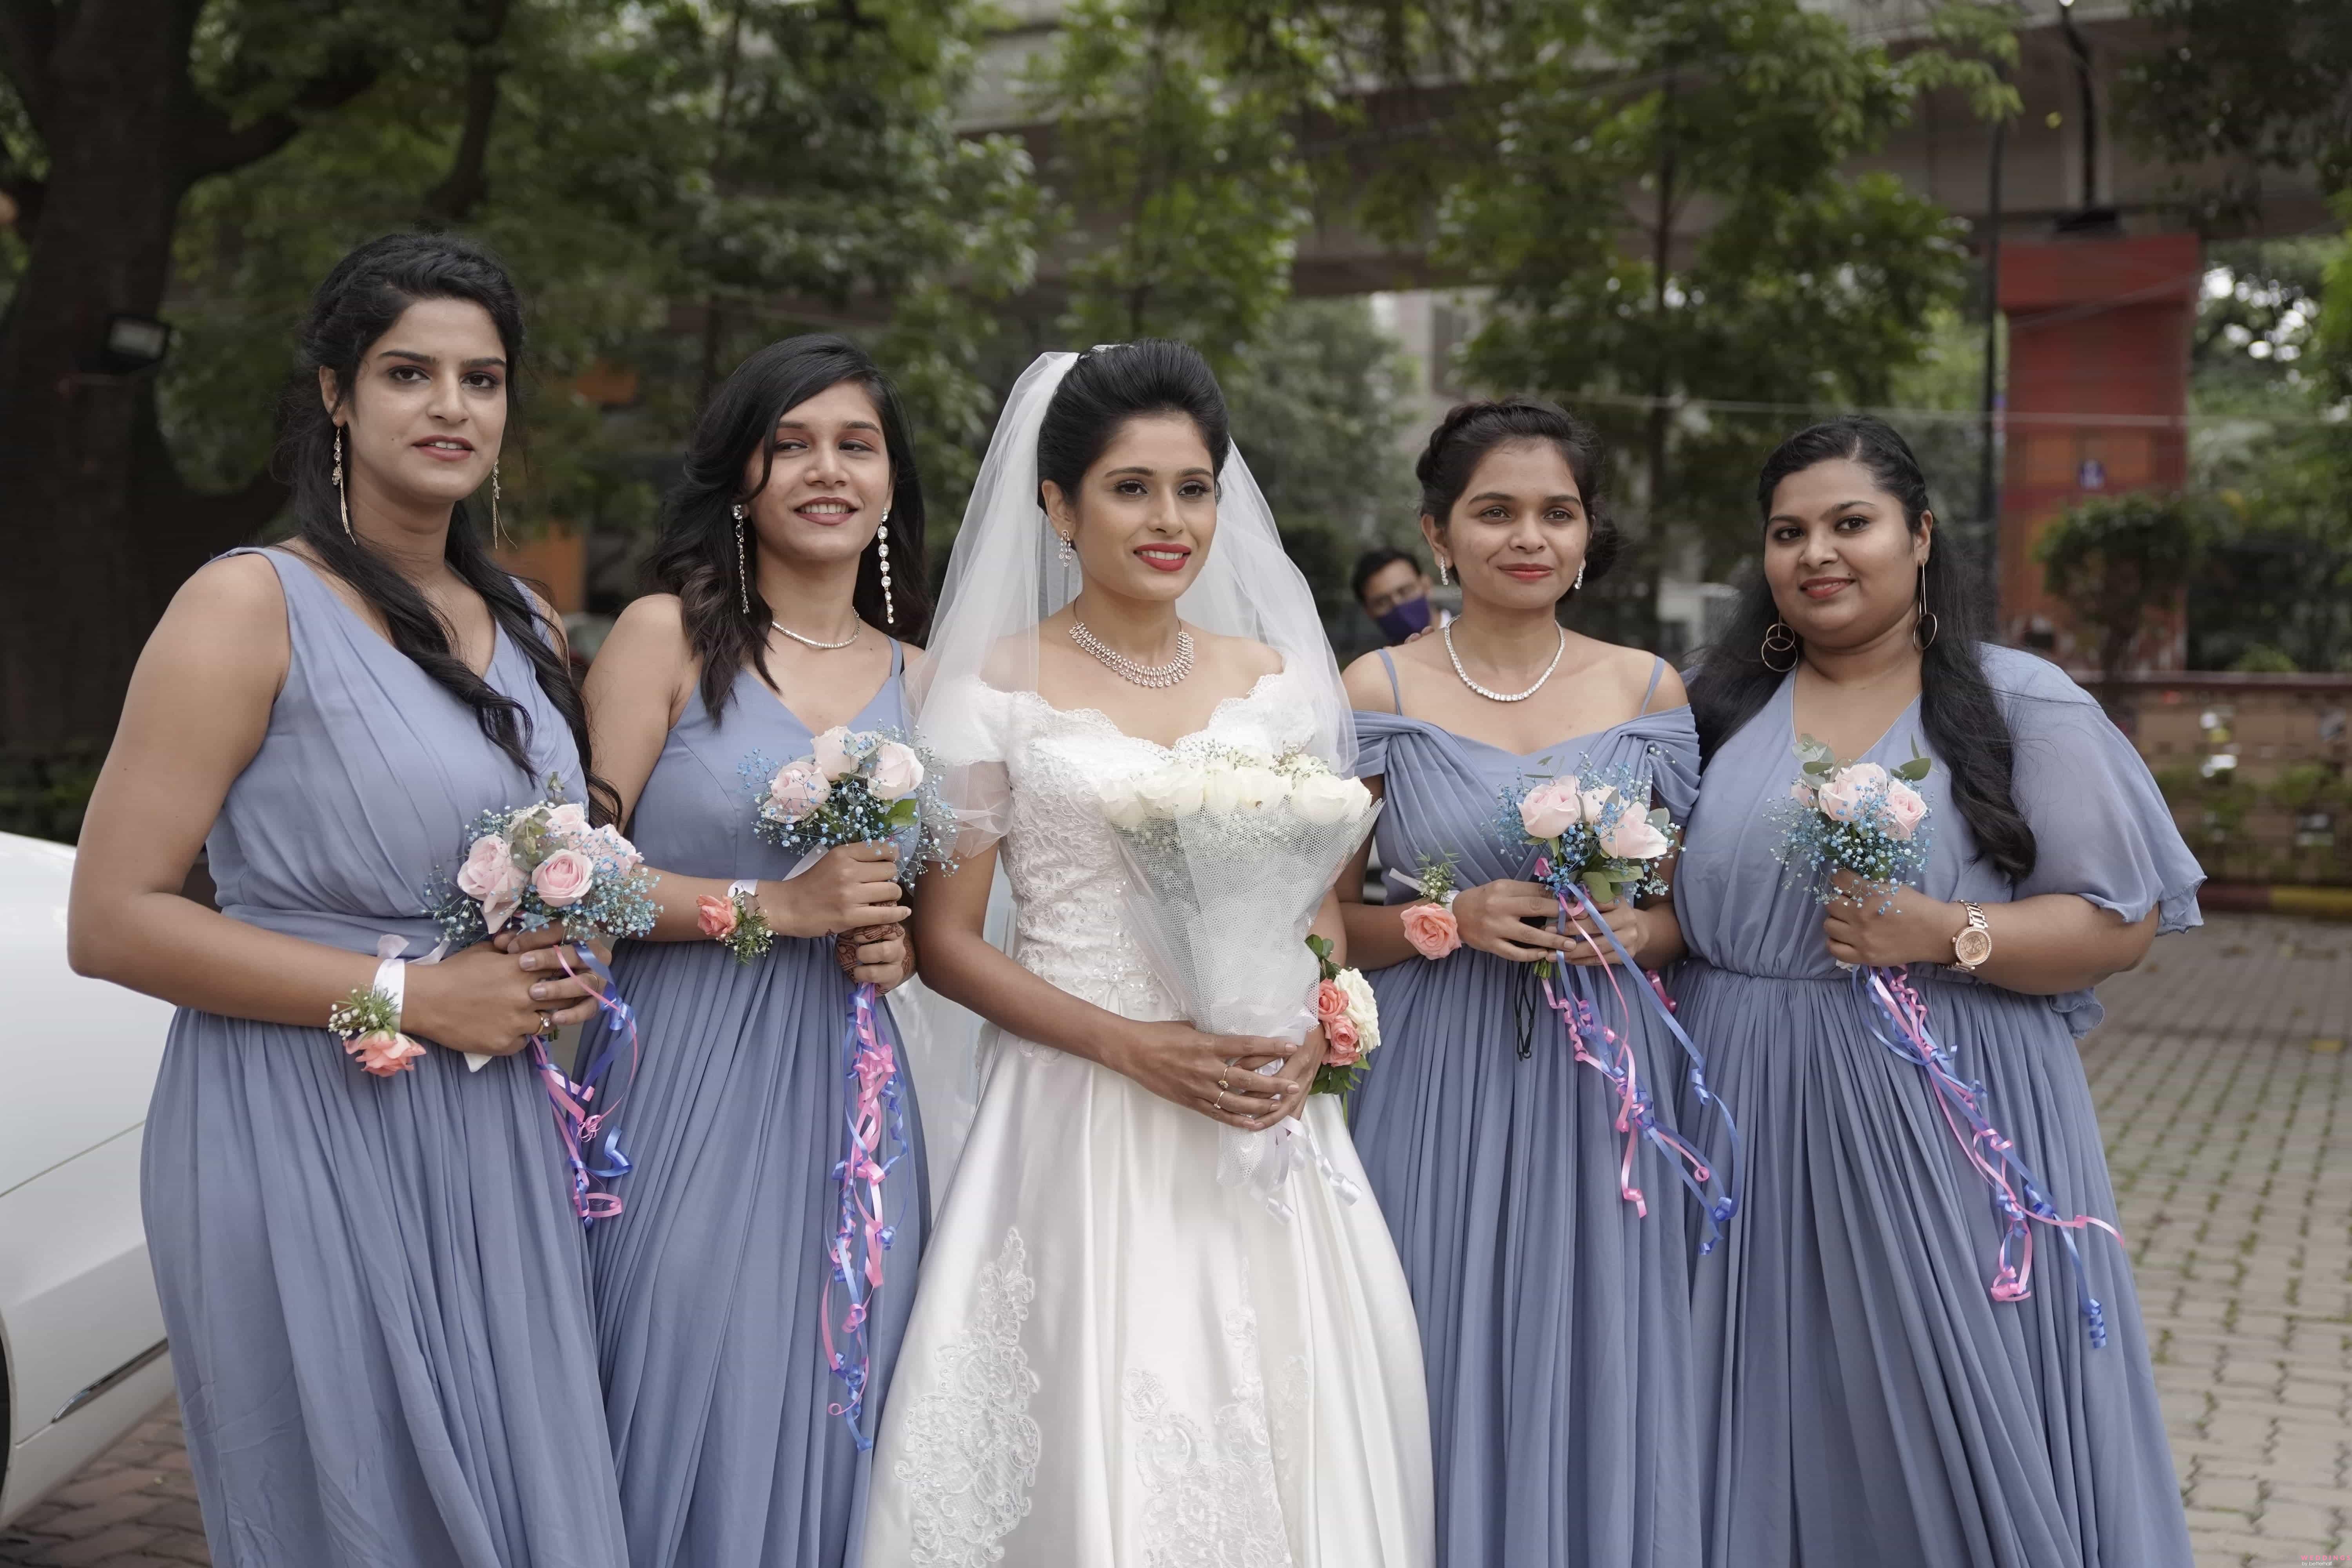 Steal-Worthy South Indian Bridesmaids Photoshoot Ideas For Weddings |  Bridesmaid photoshoot, Indian bride photography poses, Bride photography  poses